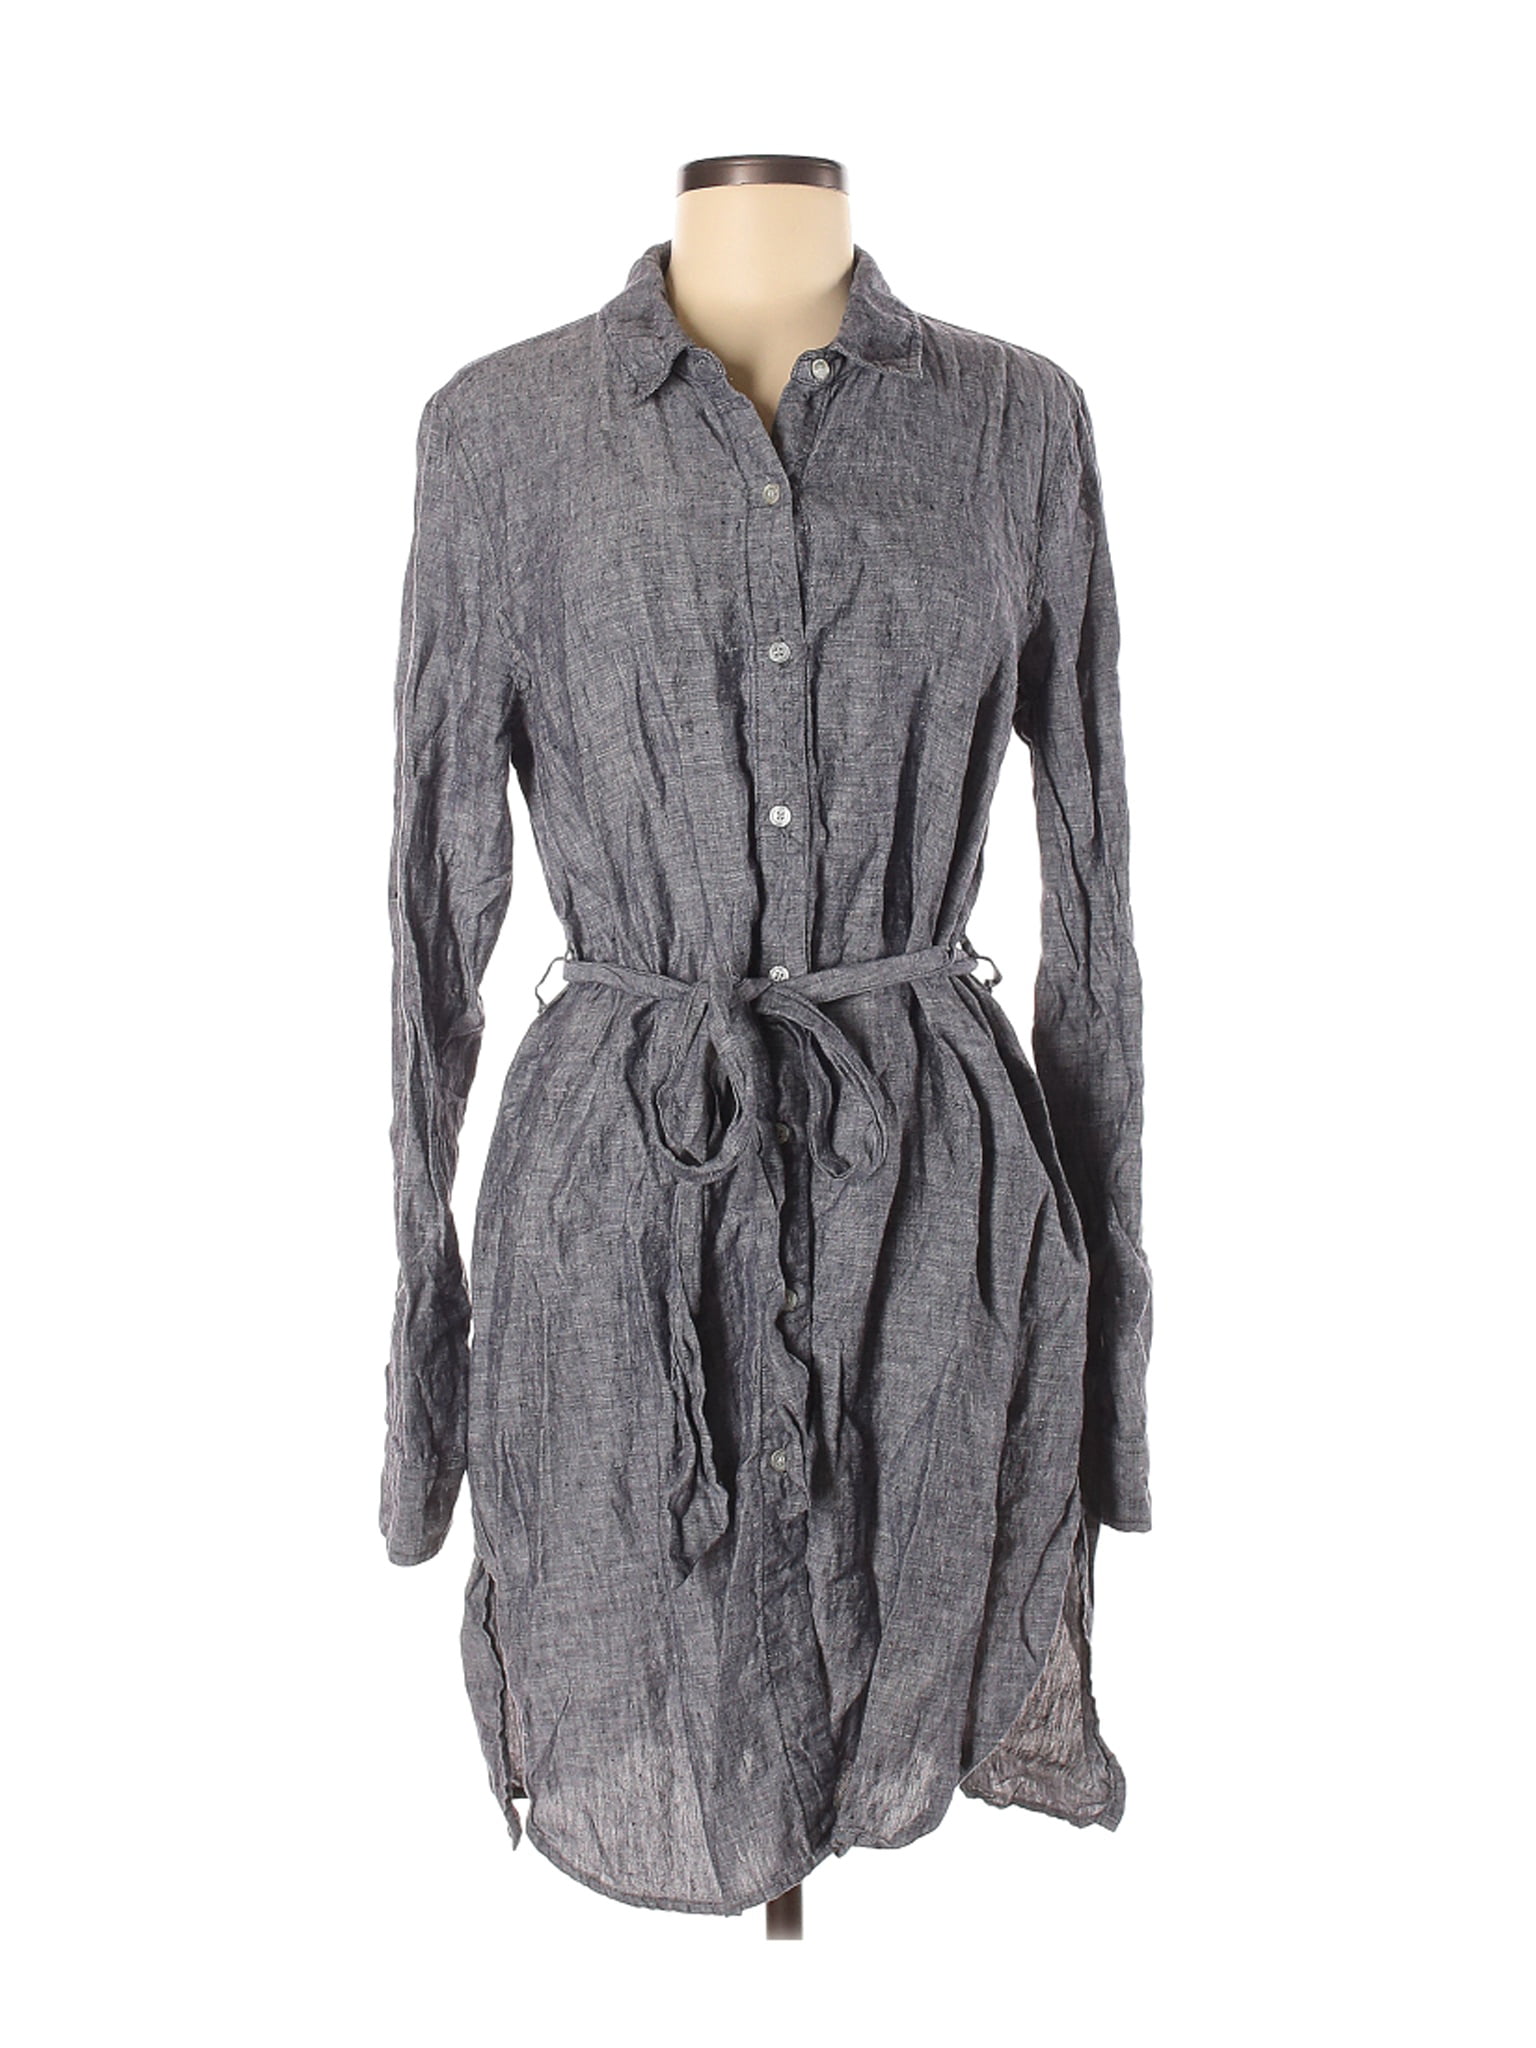 Neiman Marcus - Pre-Owned Neiman Marcus Women's Size M Casual Dress ...